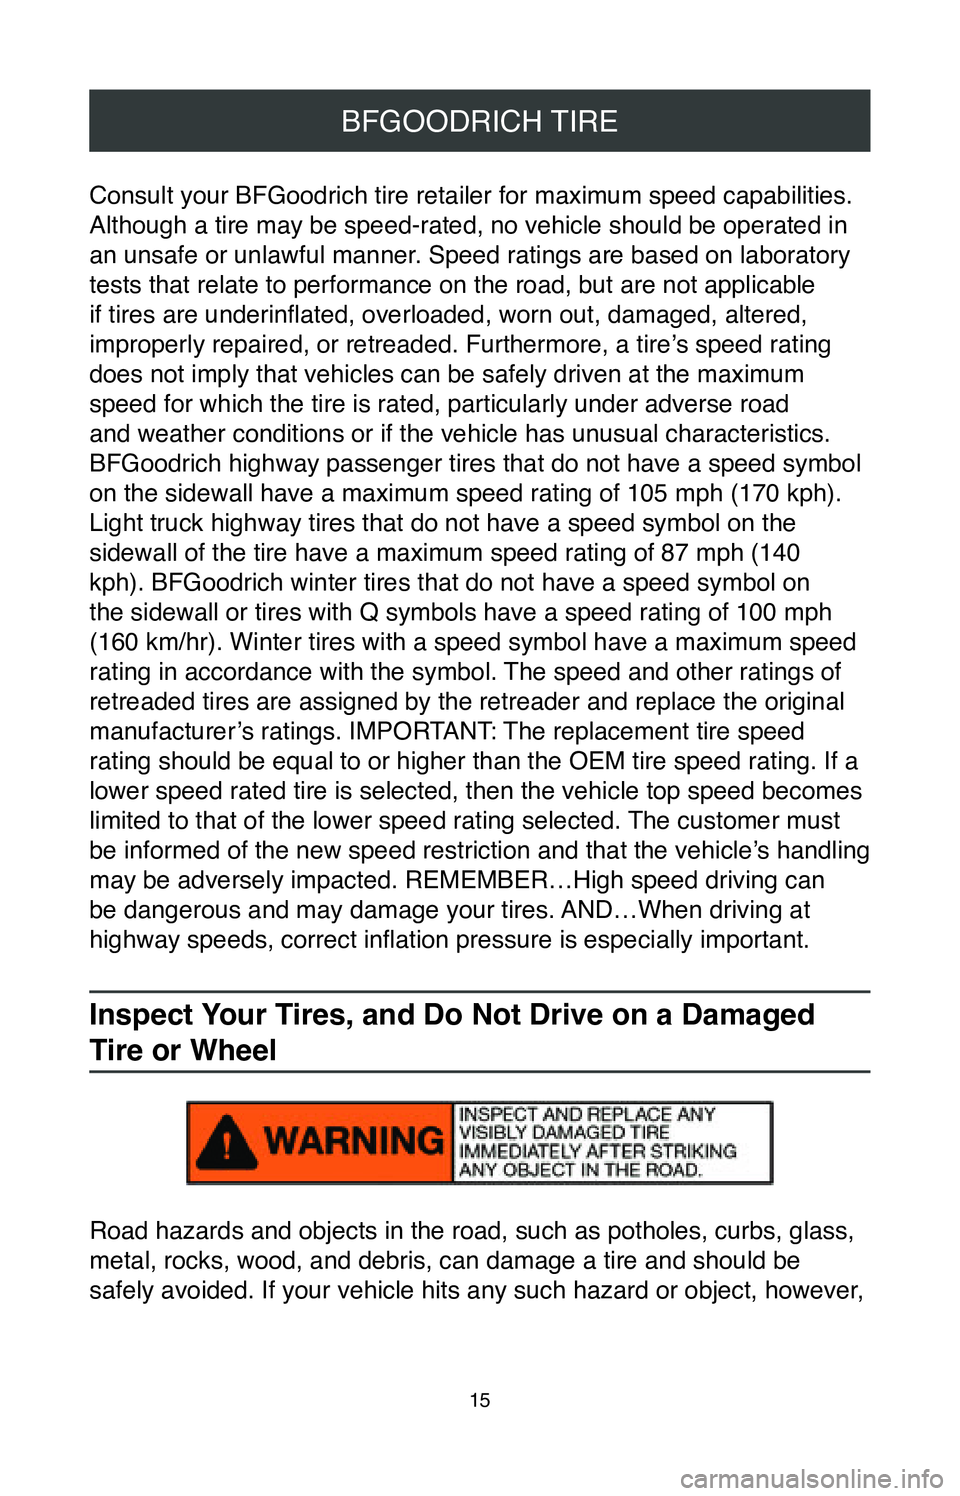 TOYOTA MIRAI 2020  Warranties & Maintenance Guides (in English) 15
BFGOODRICH TIRE
Consult your BFGoodrich tire retailer for maximum speed capabilities. 
Although a tire may be speed-rated, no vehicle should be operated in 
an unsafe or unlawful manner. Speed rati